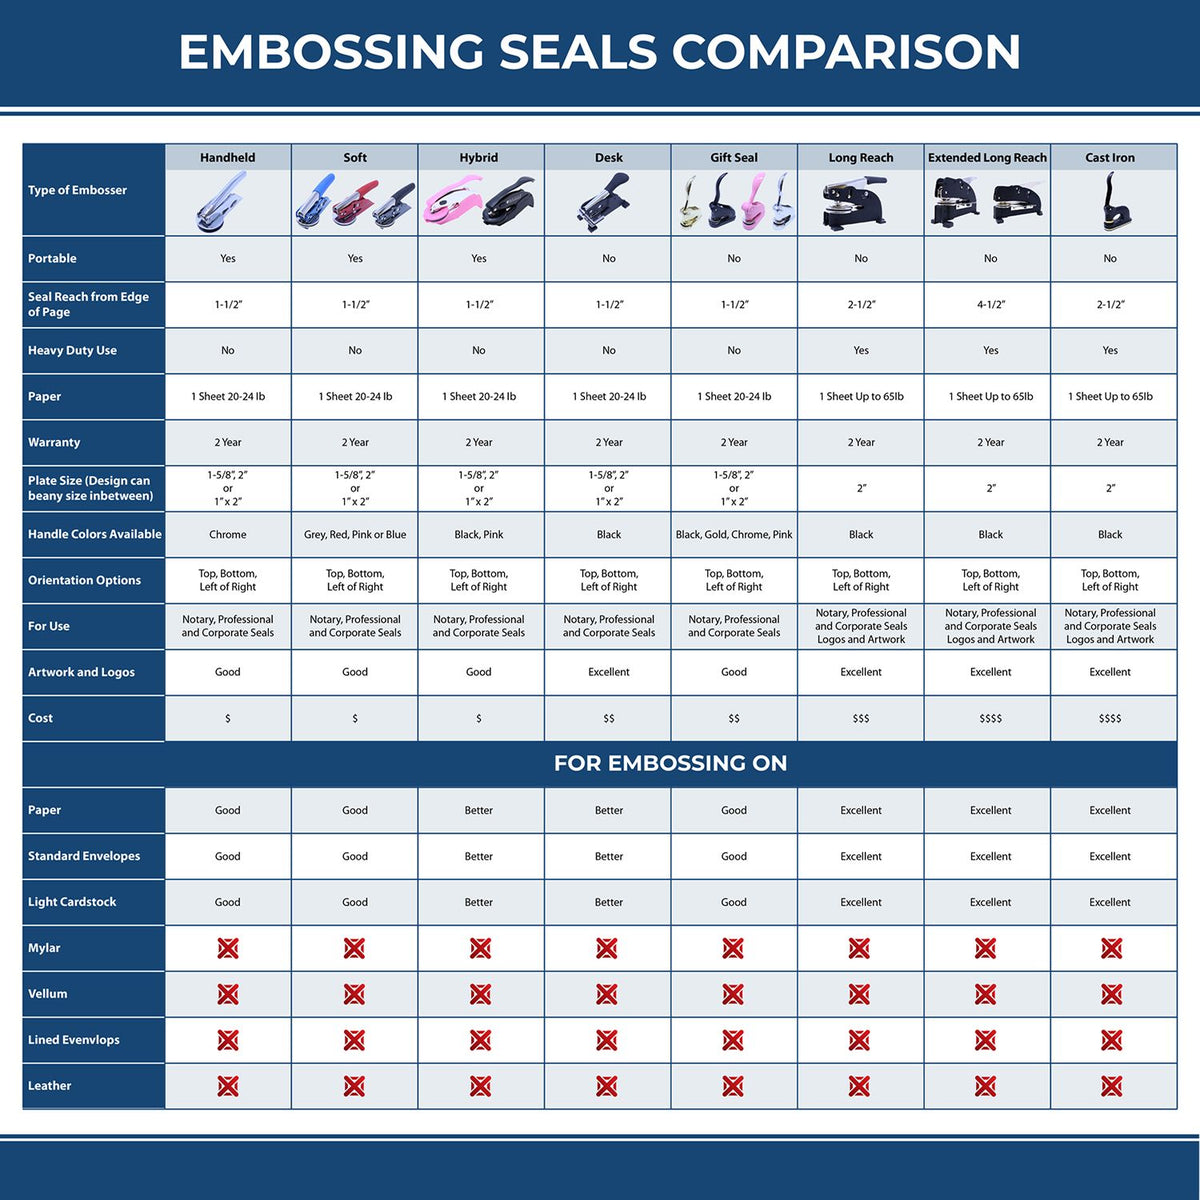 A comparison chart for the different types of mount models available for the Heavy Duty Cast Iron New York Architect Embosser.